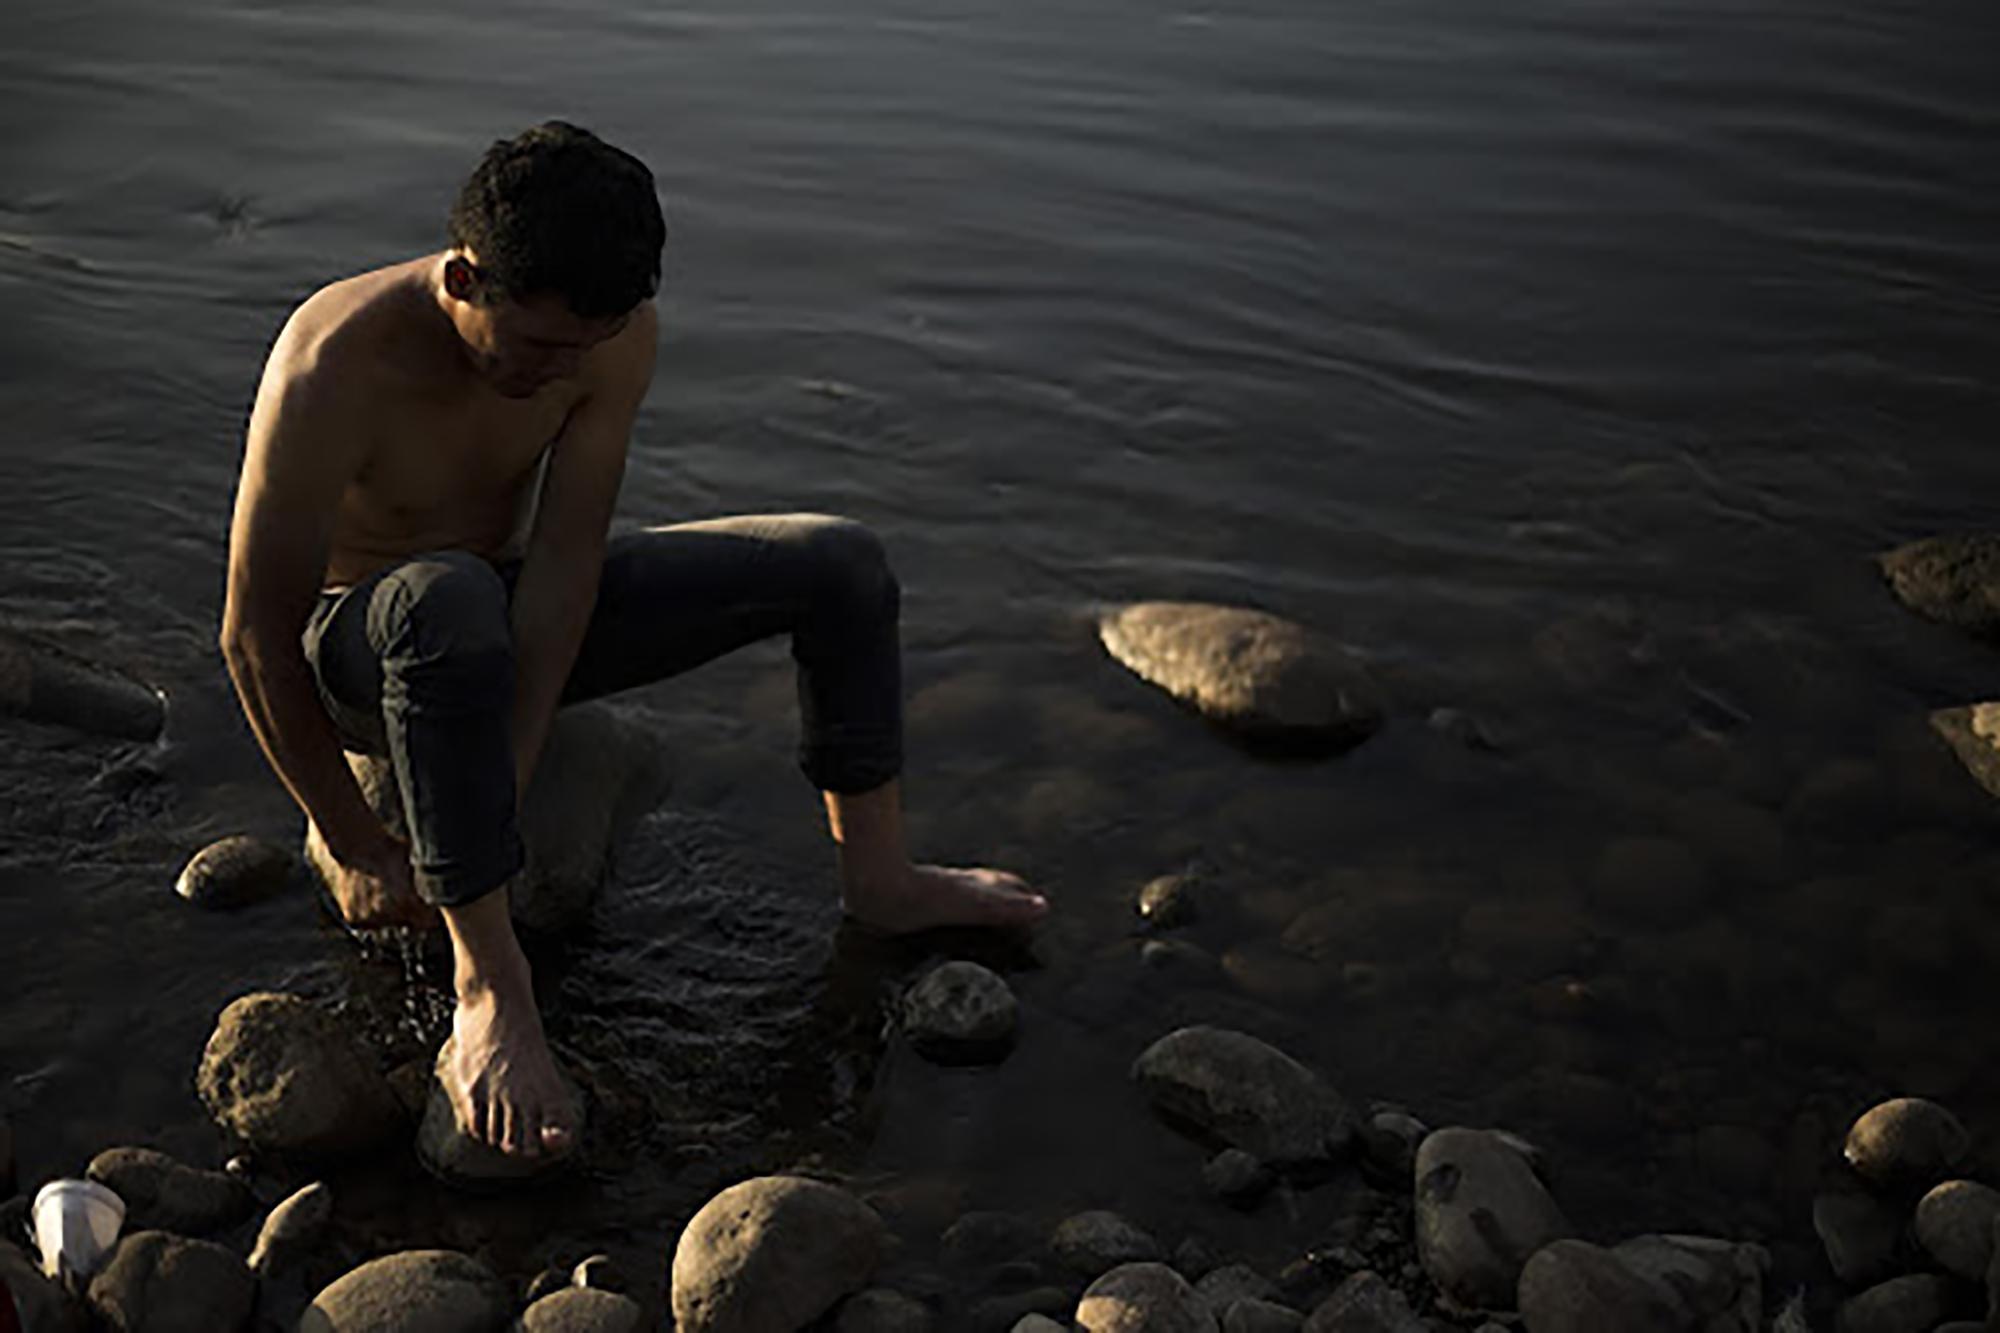 A Guatemala migrant takes a bath in the Suchiate River on January 18, 2019. He is waiting for Mexican authorities to approve his paperwork and grant him permission to enter Mexico.